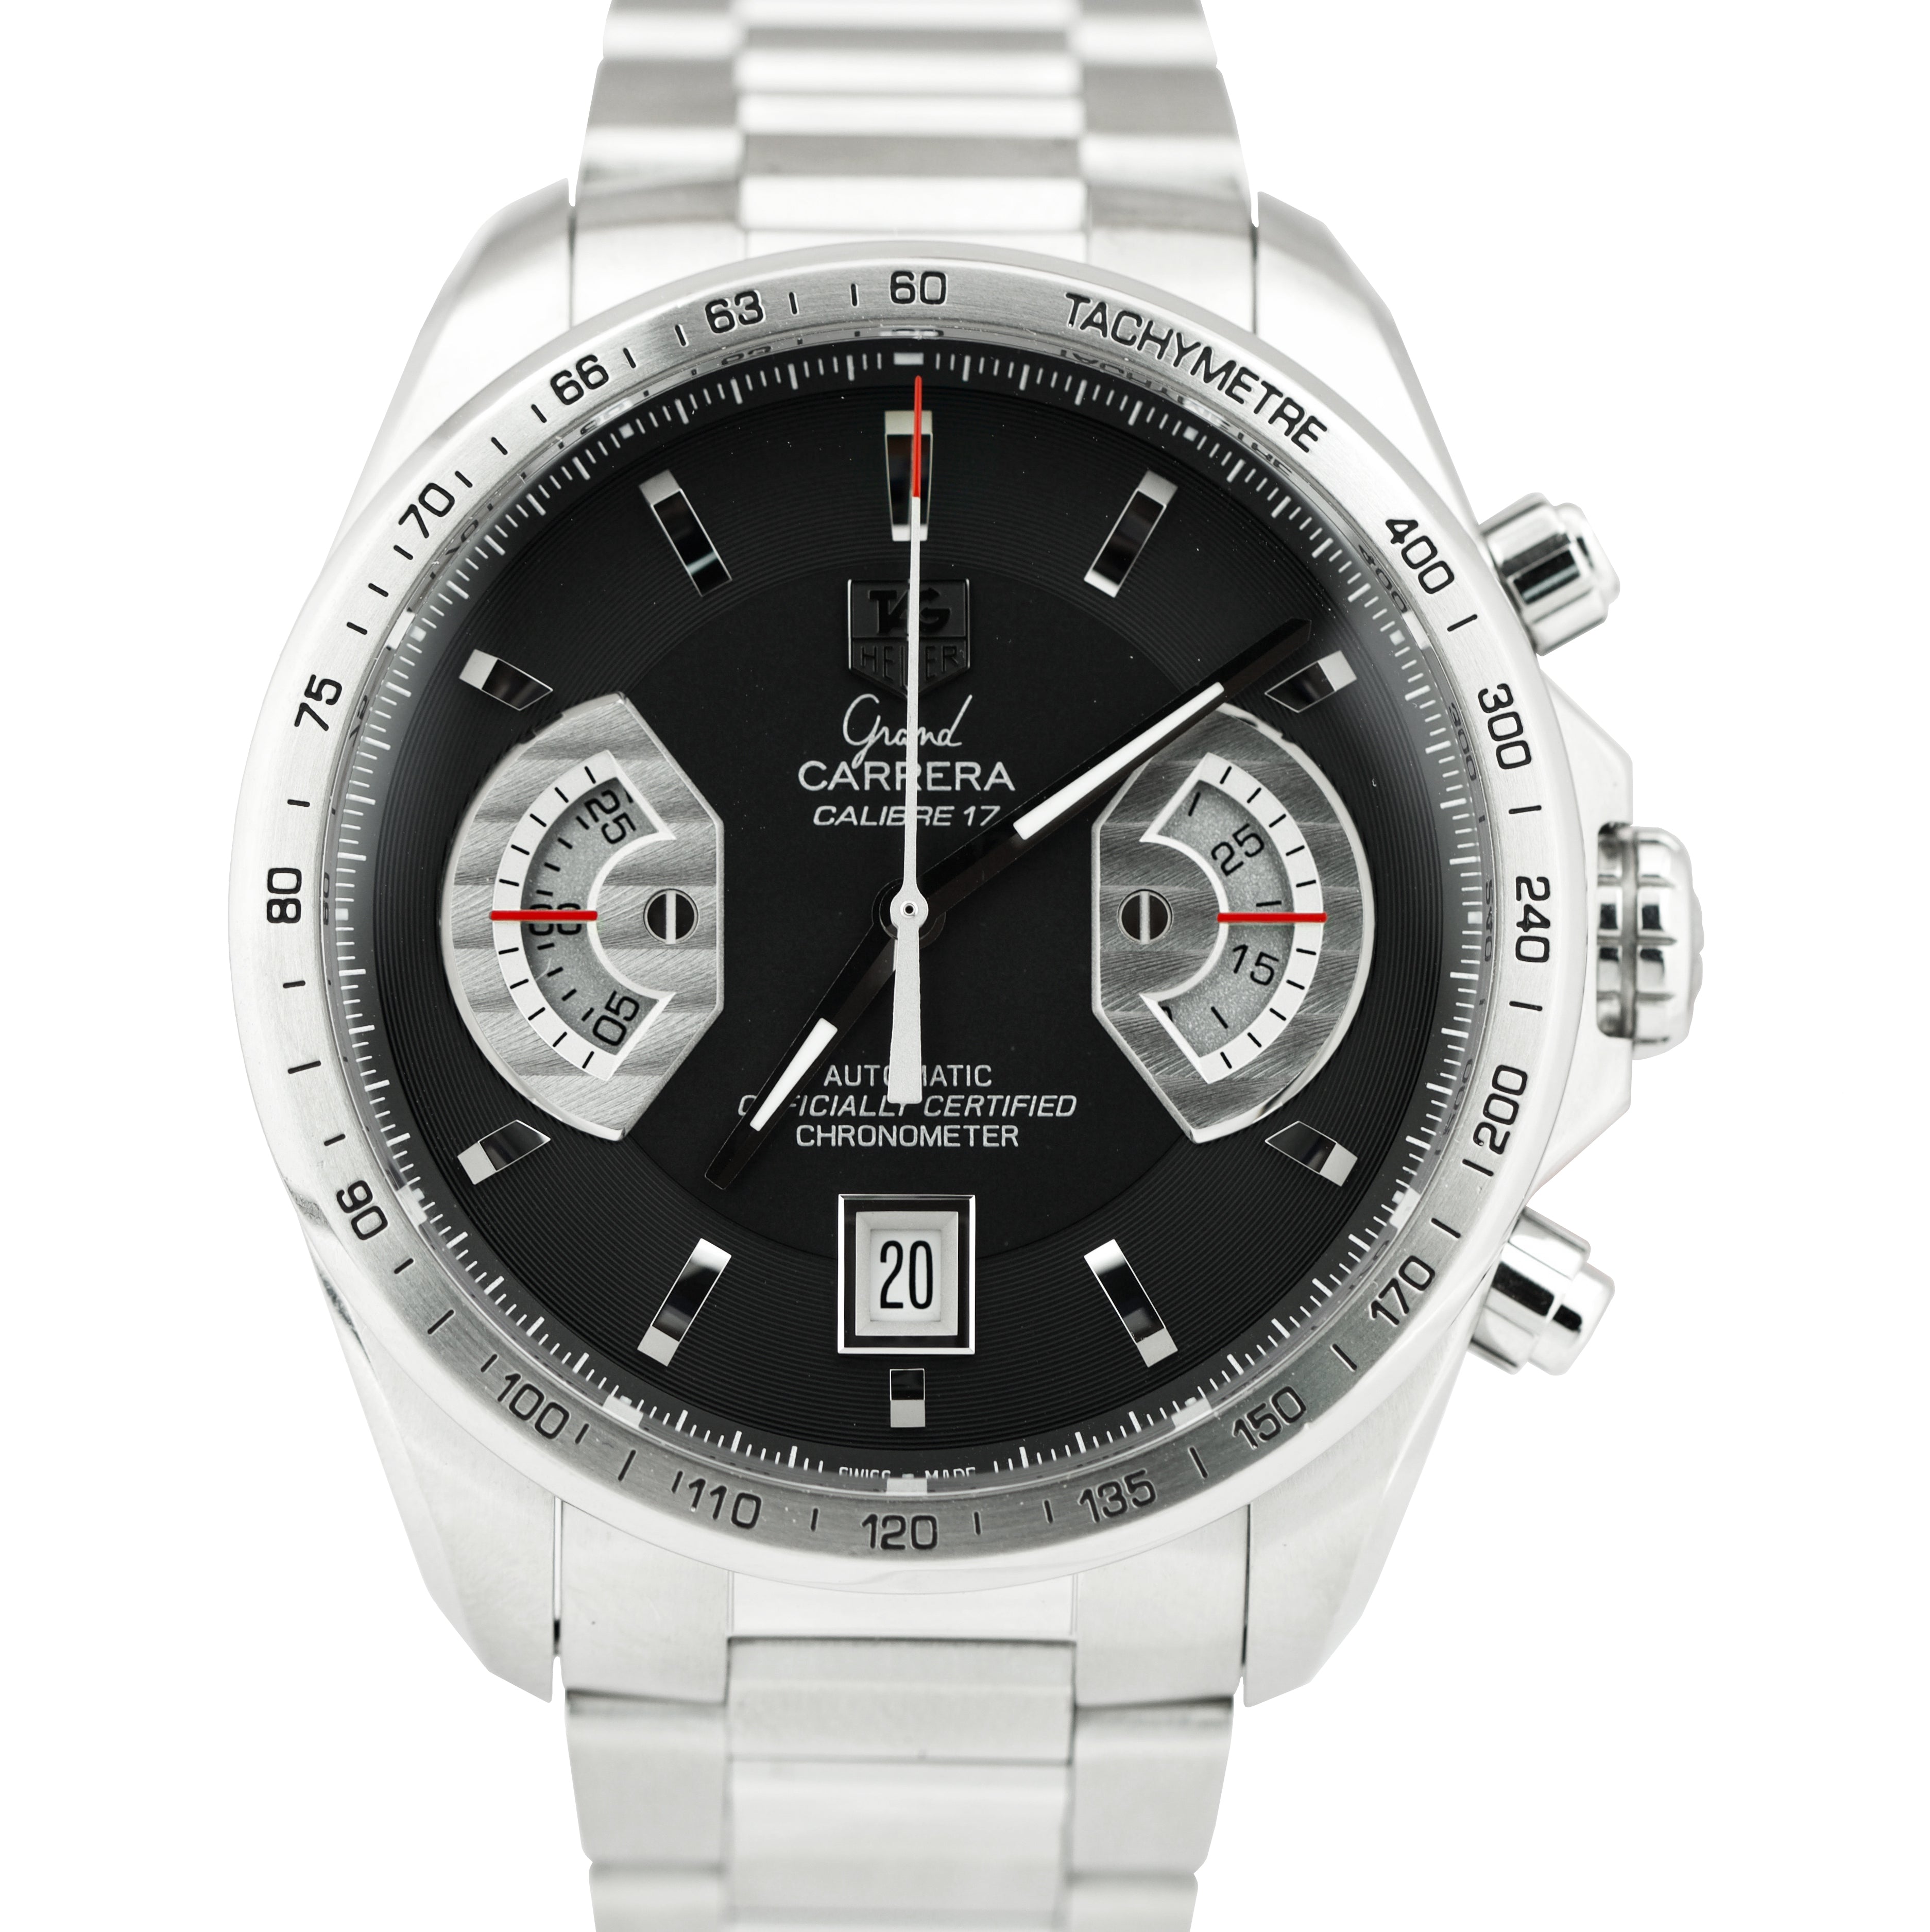 Tag Heuer Men's Grand Carrera Chronograph Stainless Steel Watch